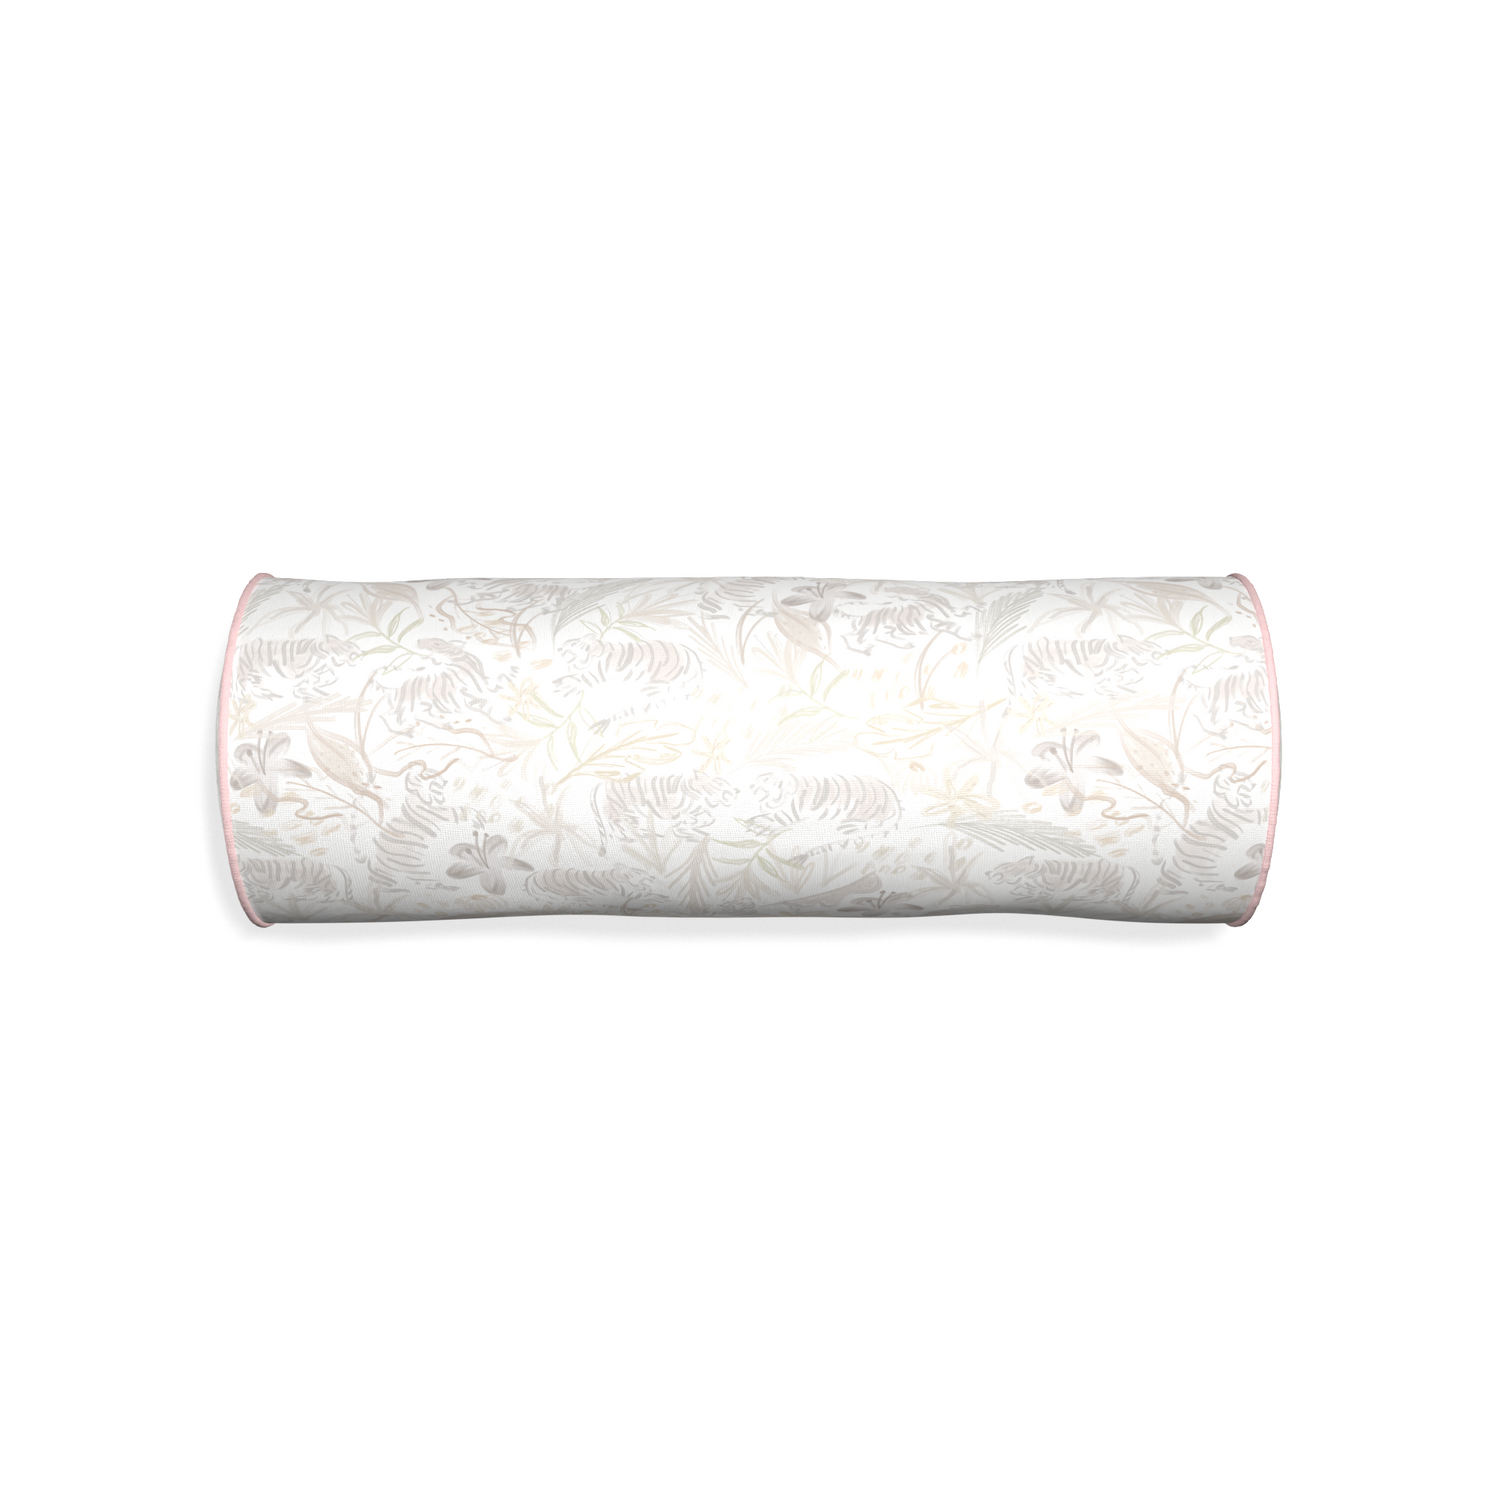 Bolster frida sand custom beige chinoiserie tigerpillow with petal piping on white background